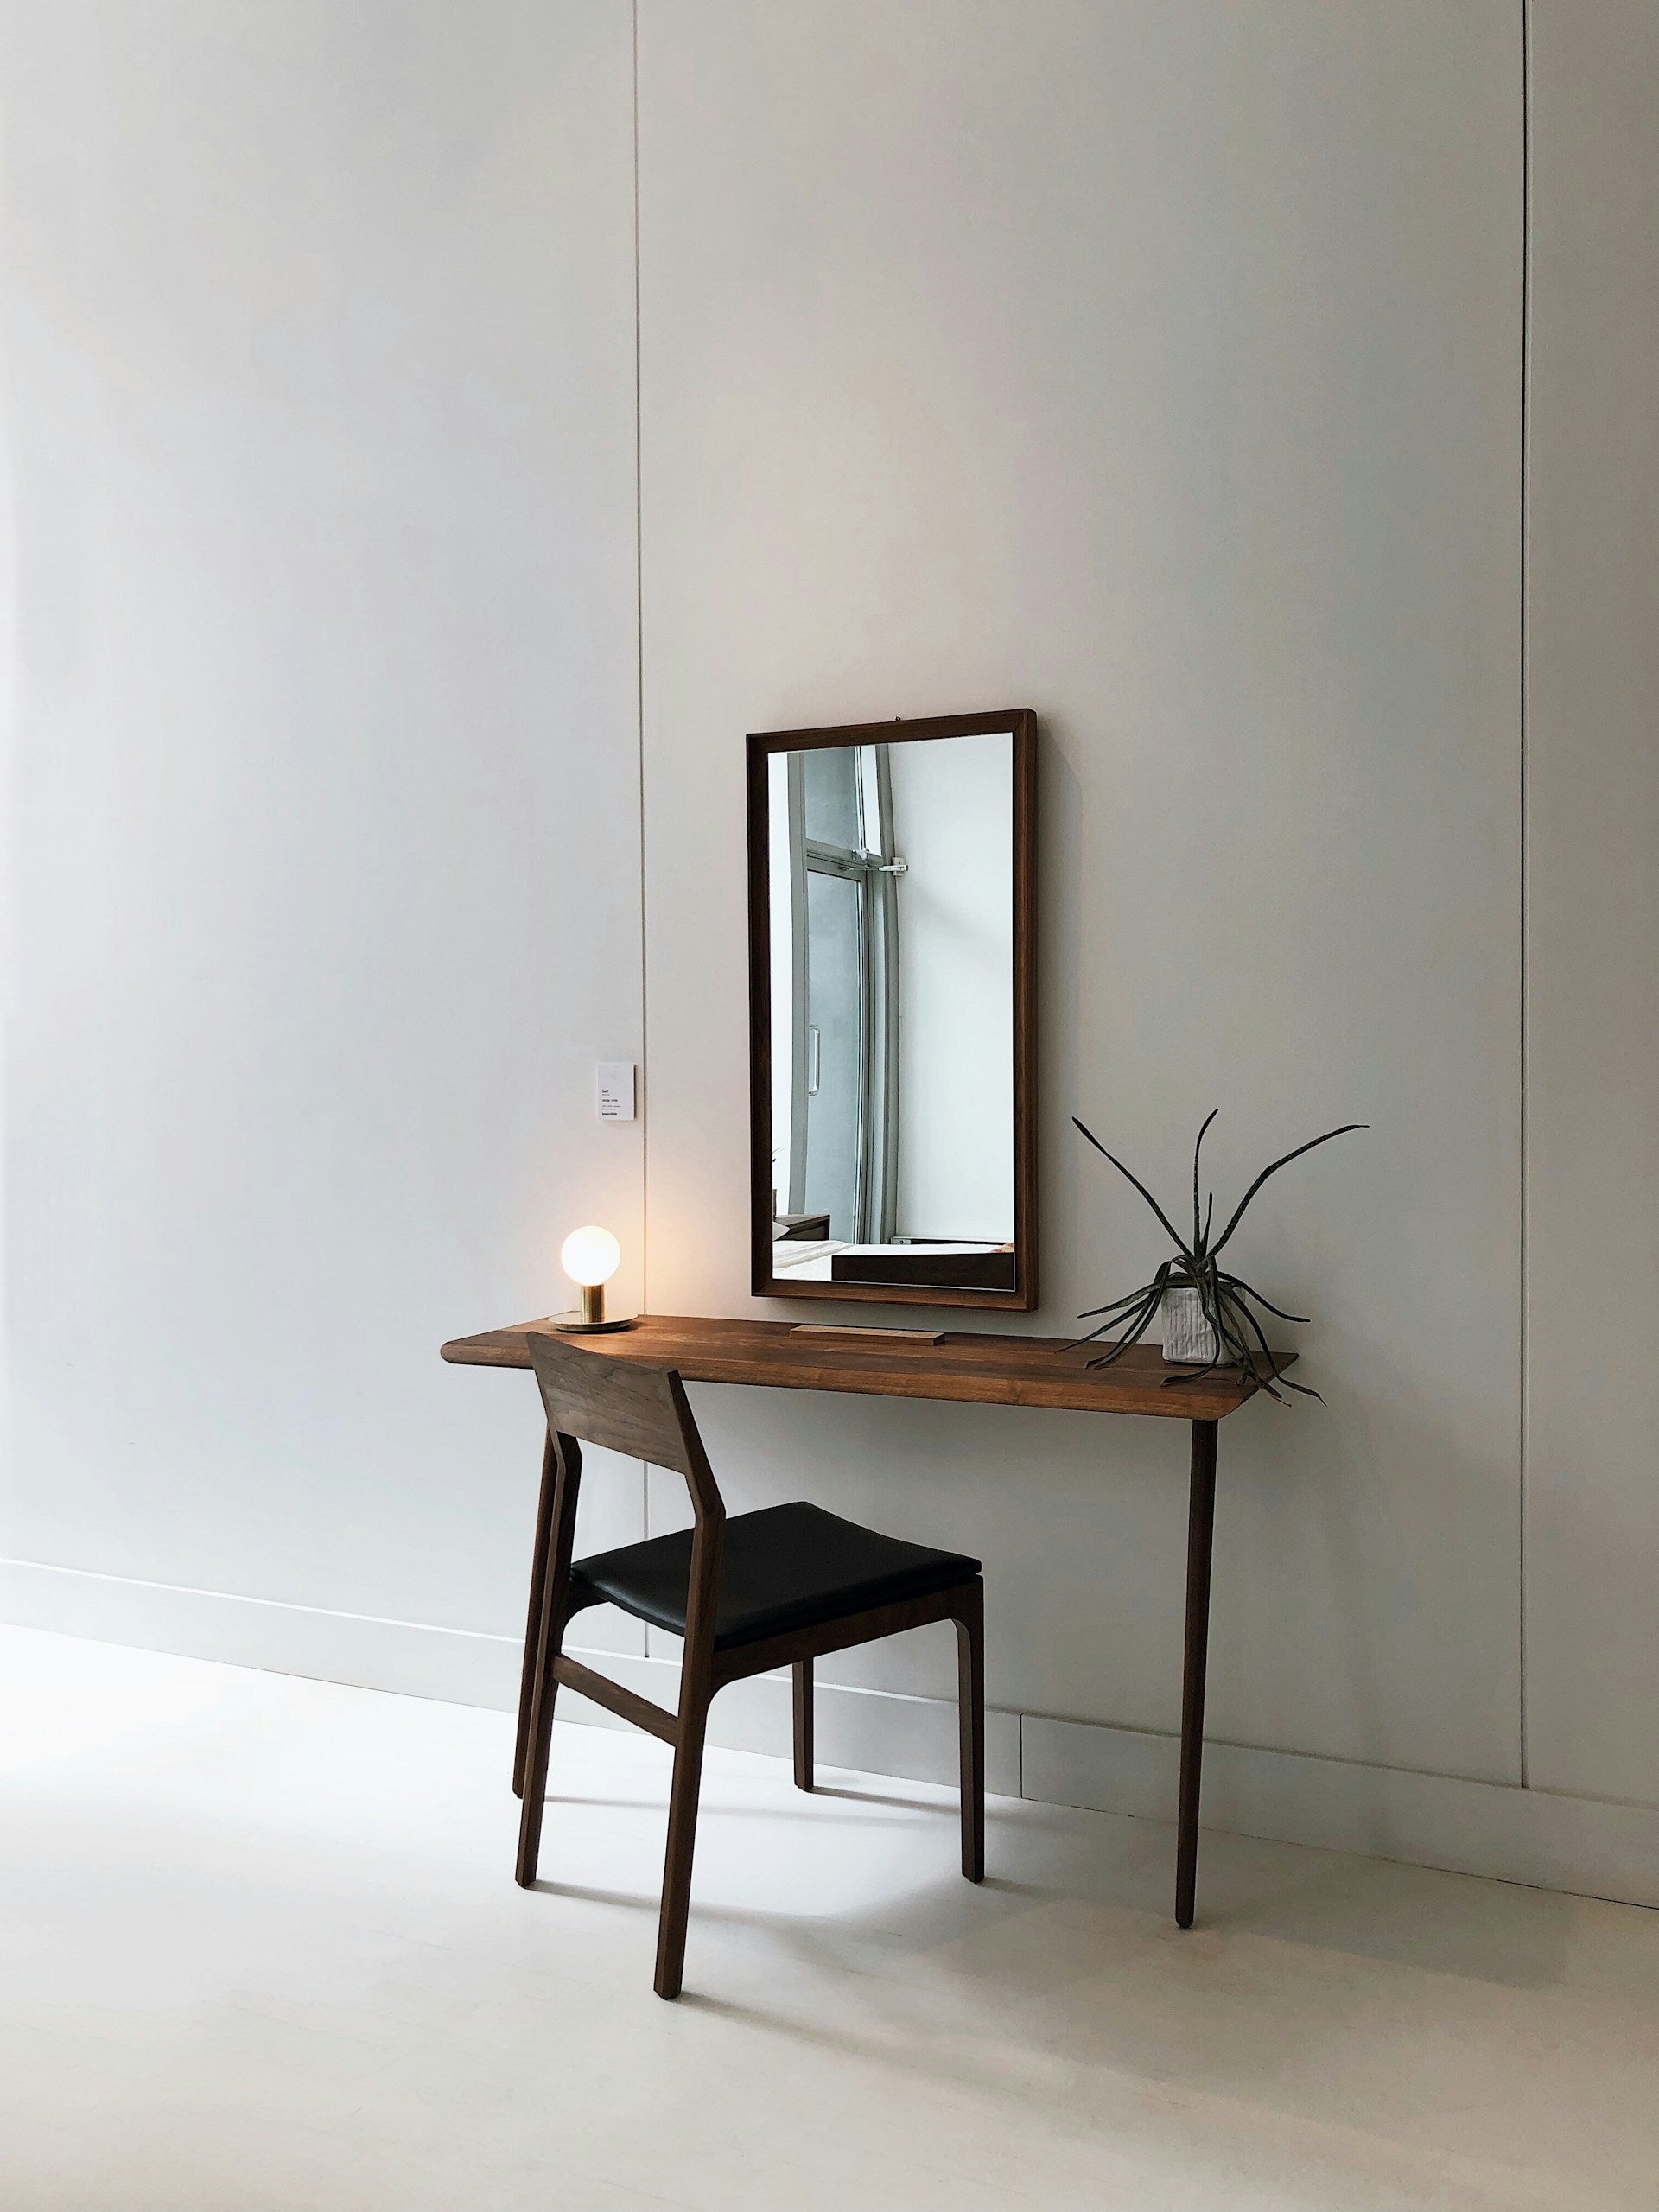 A wooden desk with a mirror and chair in front of a white wall.